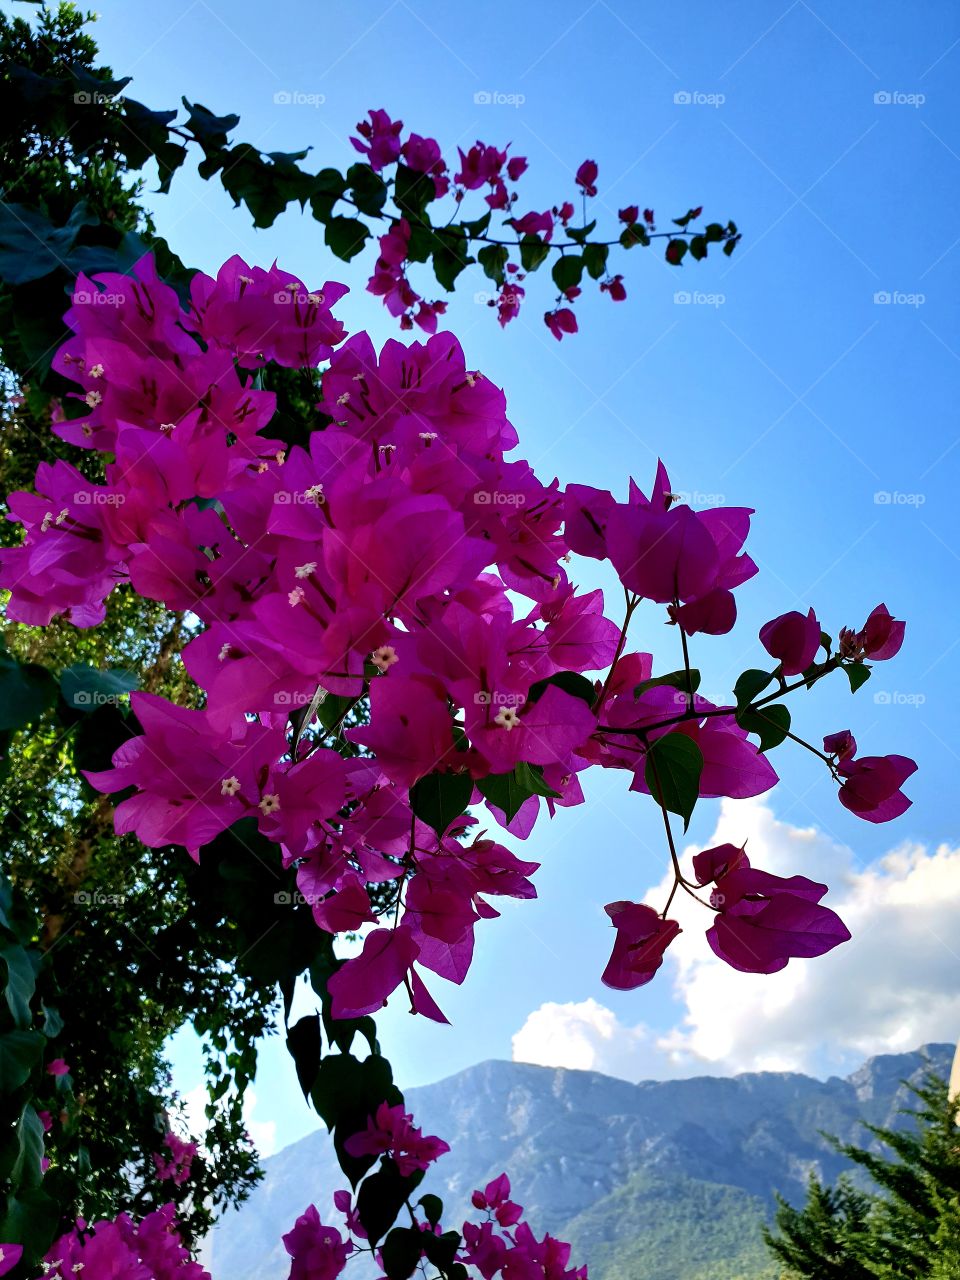 flowers sky montains